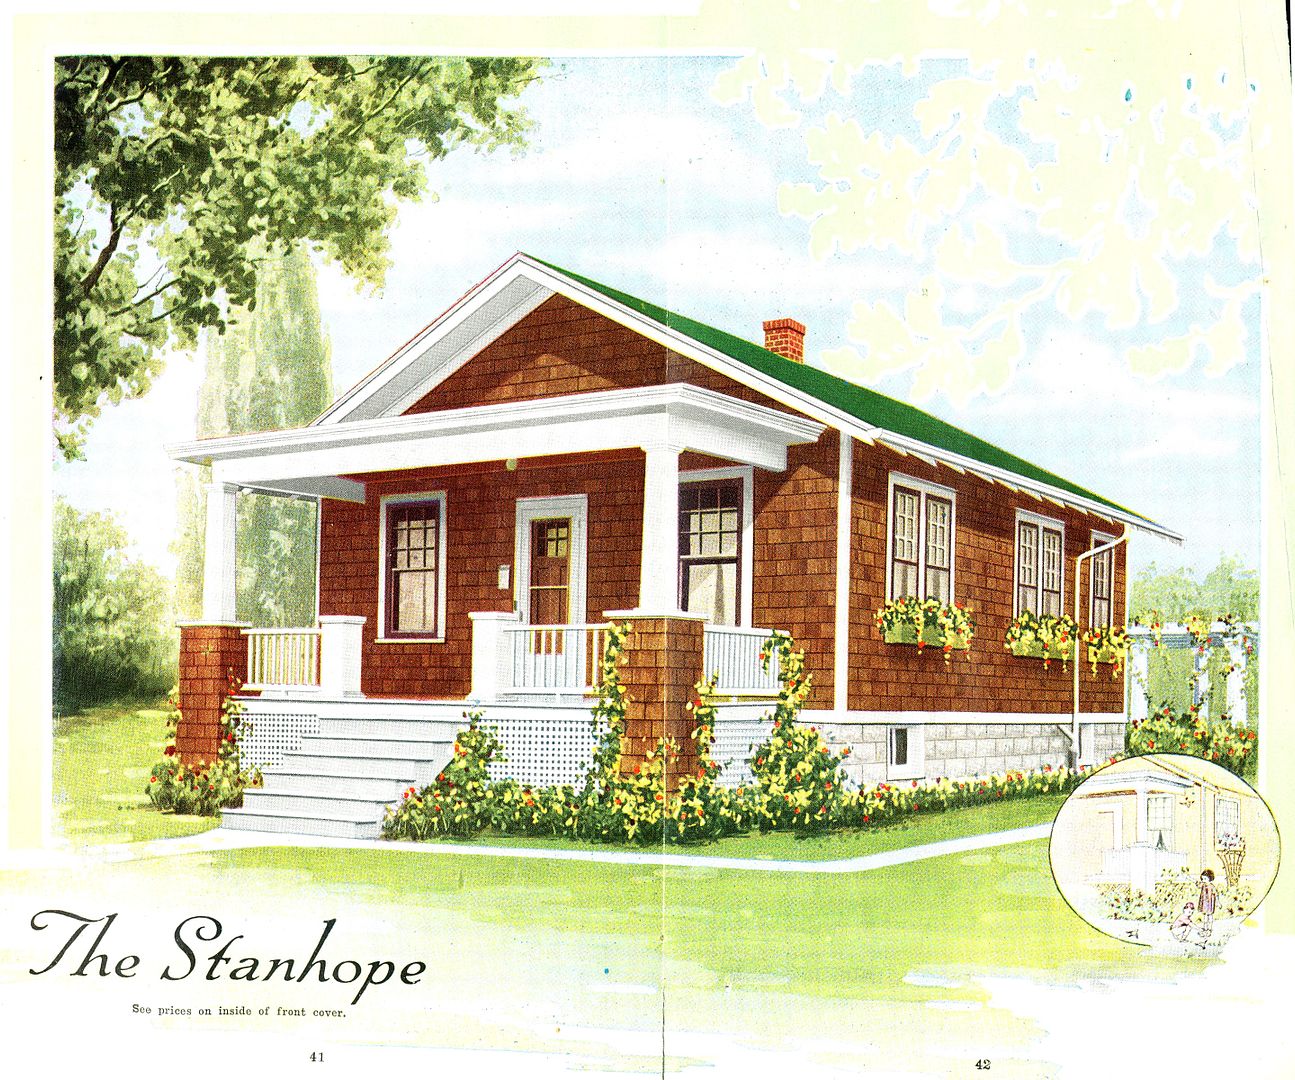 The Stanhope was one of Aladdins most popular little houses.